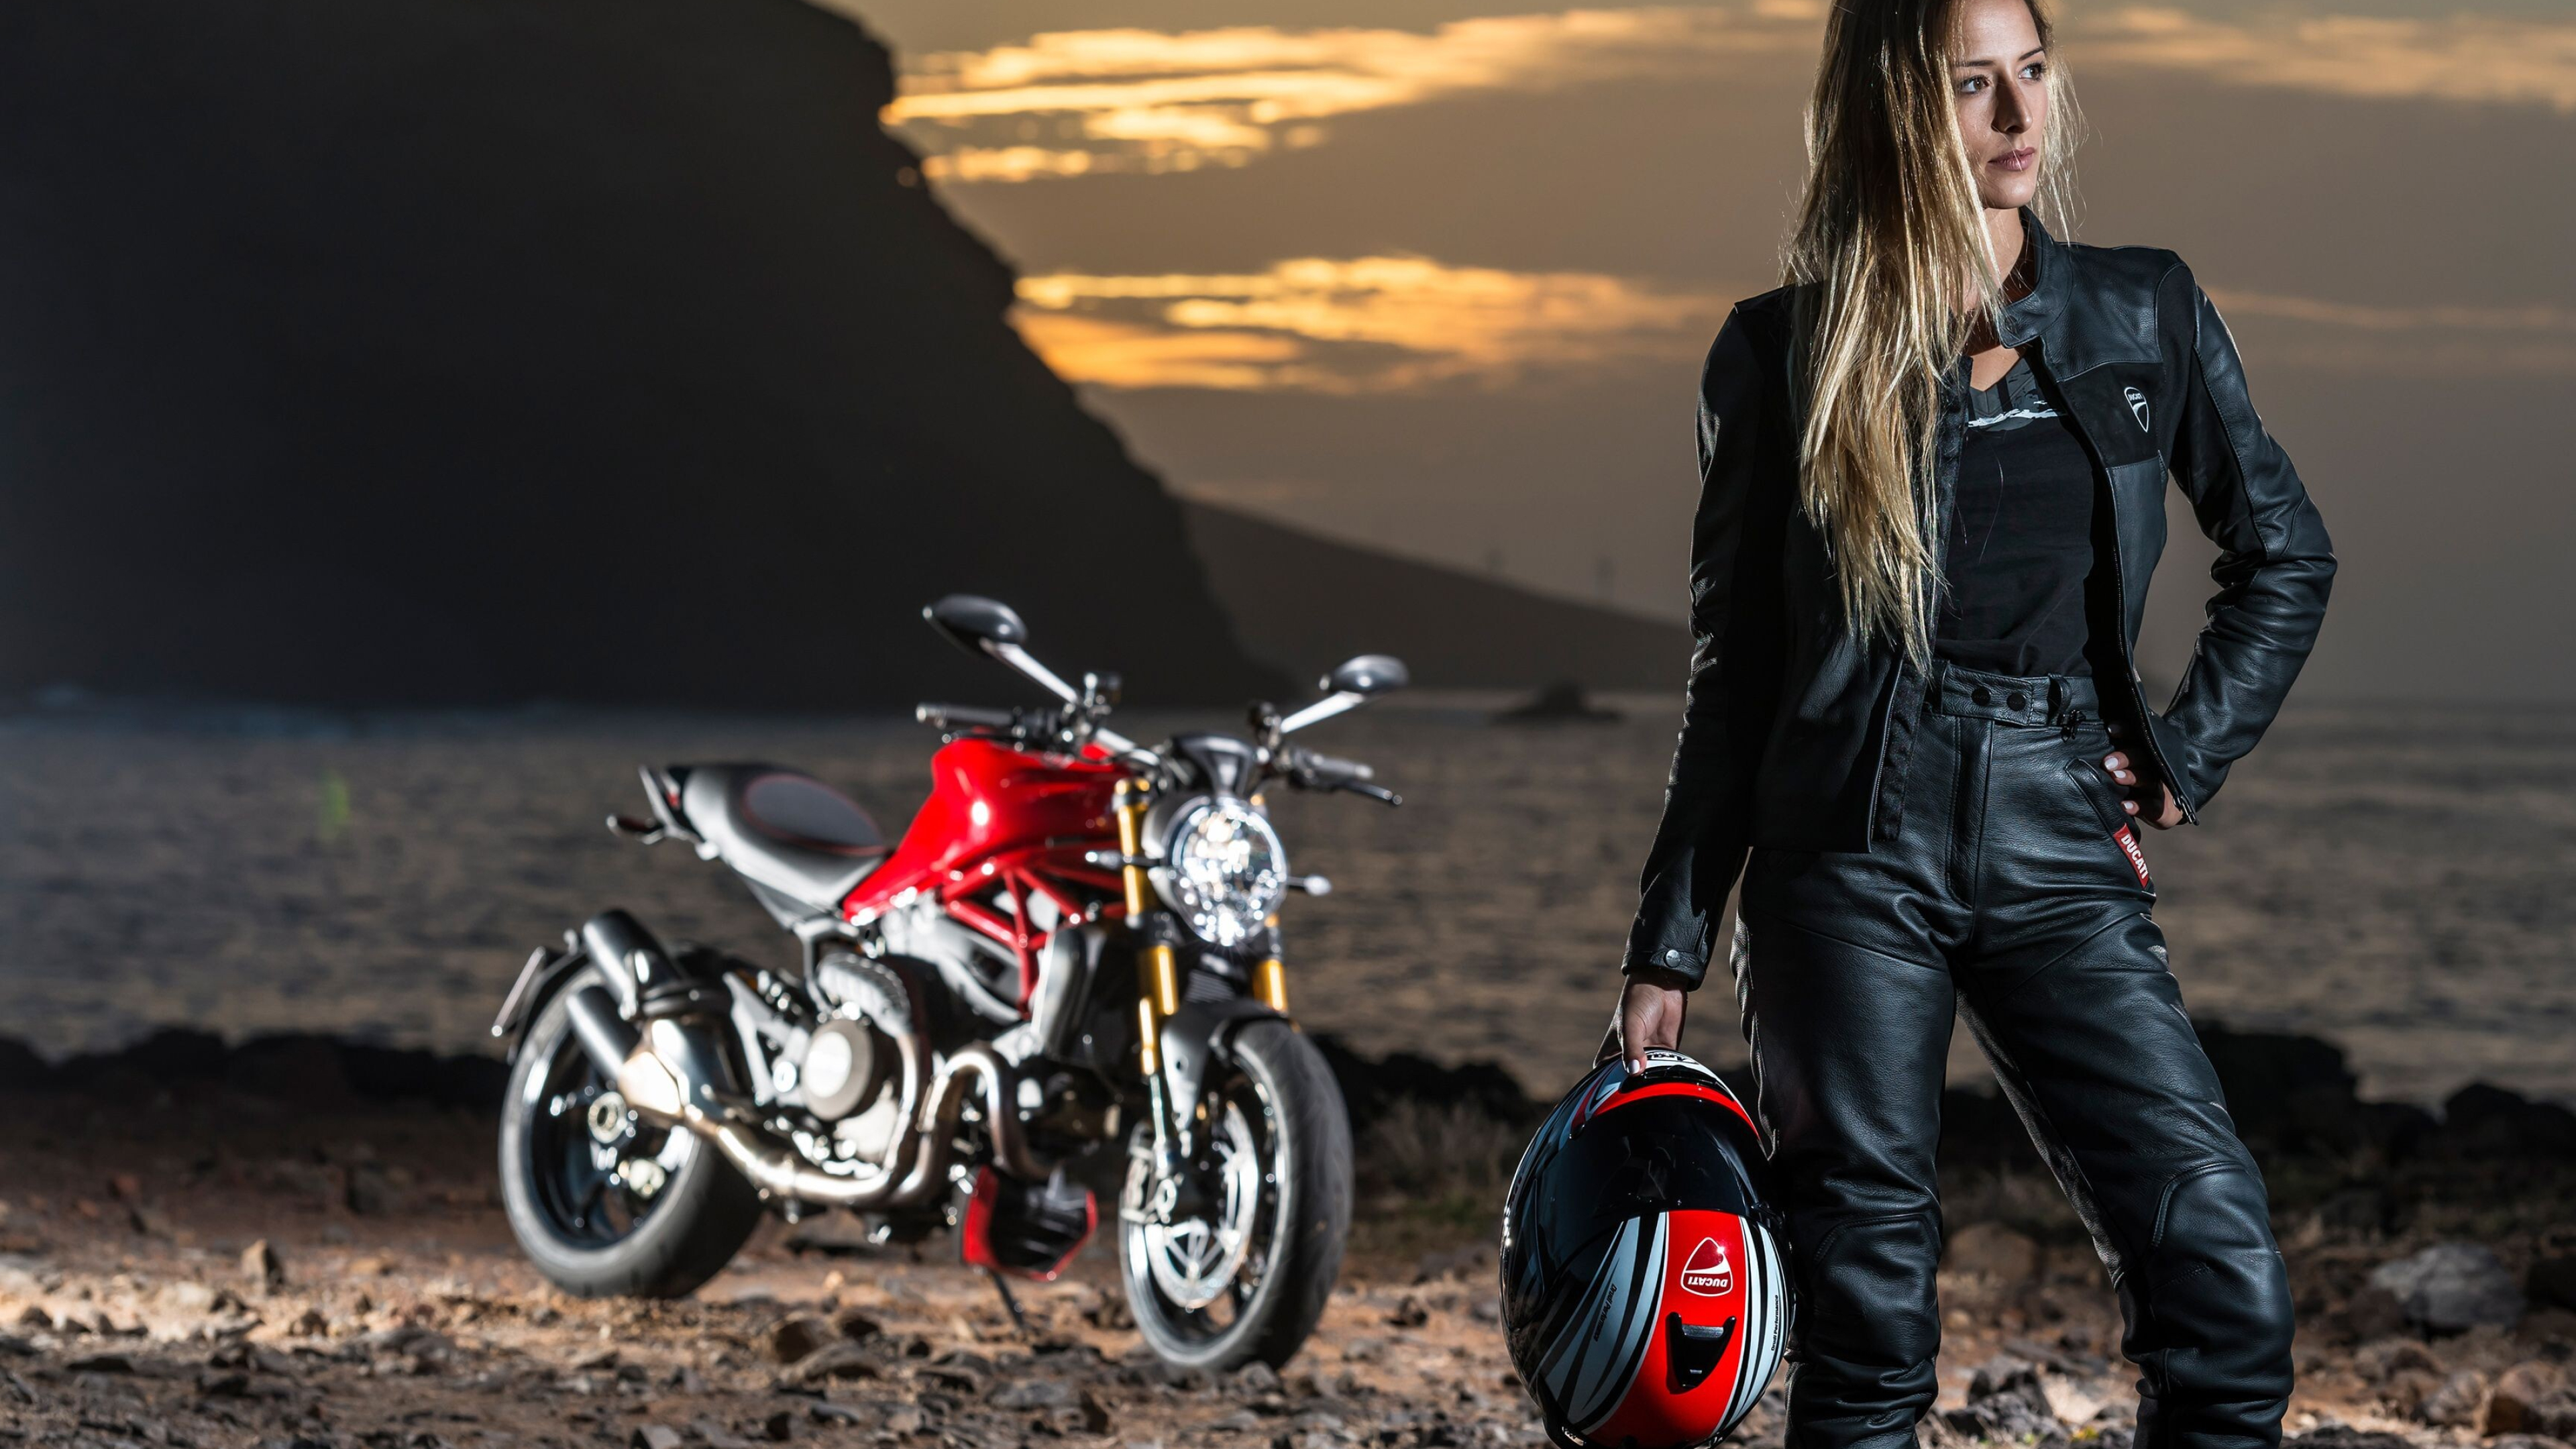 Girls and Motorcycles: Motorcycle clothing, Motorbikes suitable for female bikers from a height and weight perspective. 3840x2160 4K Wallpaper.